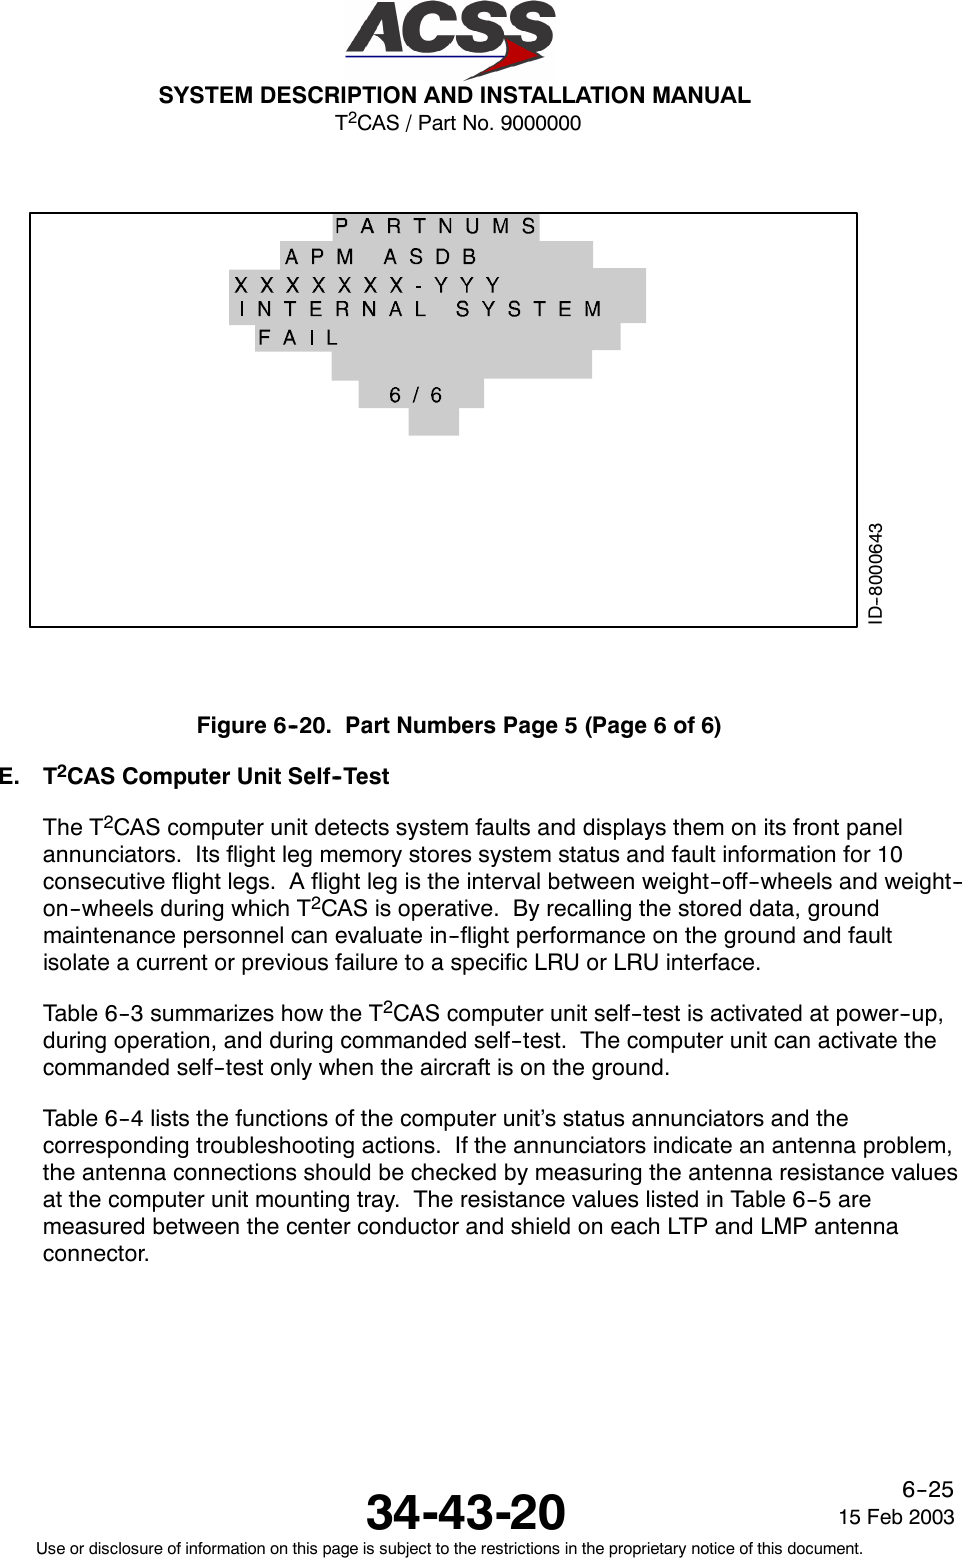 T2CAS / Part No. 9000000SYSTEM DESCRIPTION AND INSTALLATION MANUAL34-43-20 15 Feb 2003Use or disclosure of information on this page is subject to the restrictions in the proprietary notice of this document.6--25ID--8000643Figure6--20. PartNumbersPage5(Page6of6)E. T2CAS Computer Unit Self--TestThe T2CAS computer unit detects system faults and displays them on its front panelannunciators. Its flight leg memory stores system status and fault information for 10consecutive flight legs. A flight leg is the interval between weight--off--wheels and weight--on--wheels during which T2CAS is operative. By recalling the stored data, groundmaintenance personnel can evaluate in--flight performance on the ground and faultisolate a current or previous failure to a specific LRU or LRU interface.Table 6--3 summarizes how the T2CAS computer unit self--test is activated at power--up,during operation, and during commanded self--test. The computer unit can activate thecommanded self--test only when the aircraft is on the ground.Table 6--4 lists the functions of the computer unit’s status annunciators and thecorresponding troubleshooting actions. If the annunciators indicate an antenna problem,the antenna connections should be checked by measuring the antenna resistance valuesat the computer unit mounting tray. The resistance values listed in Table 6--5 aremeasured between the center conductor and shield on each LTP and LMP antennaconnector.